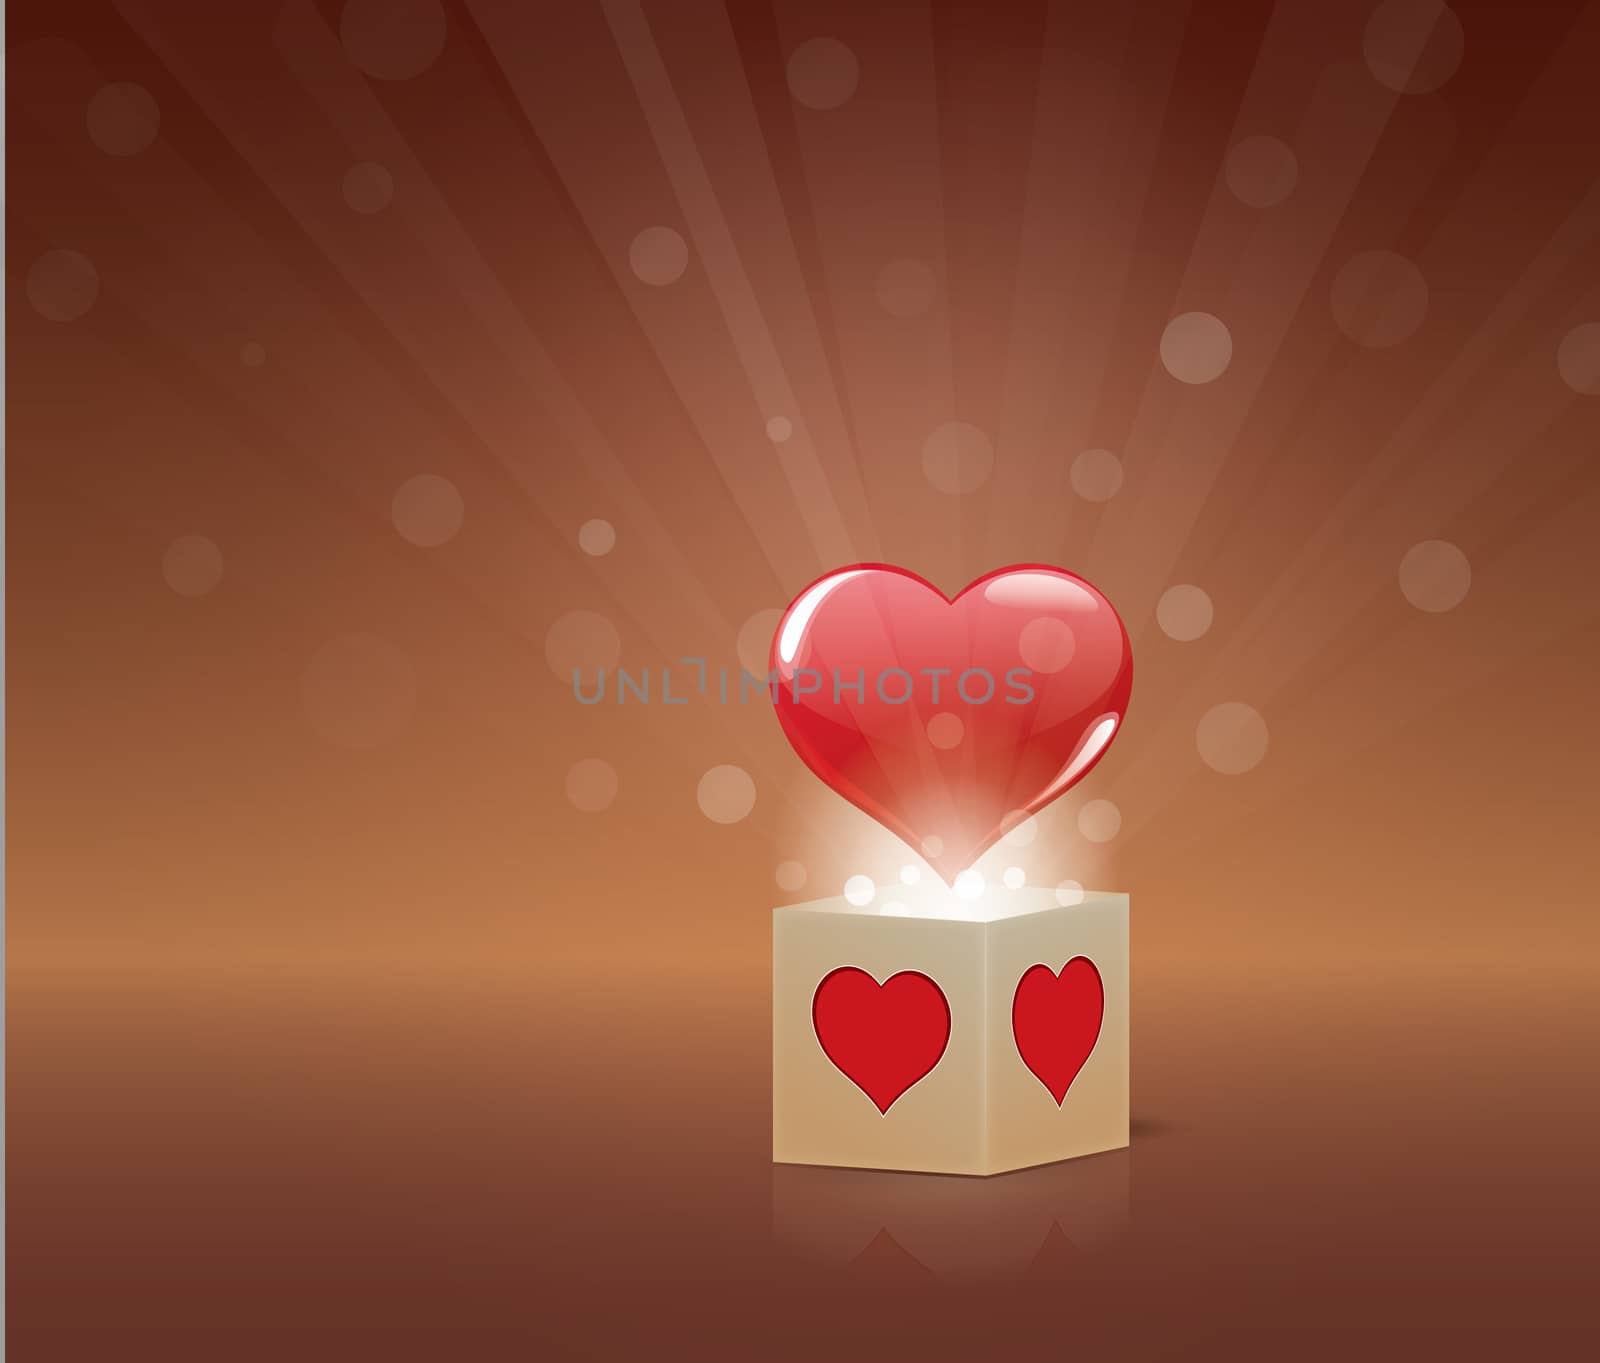 heart flies out of the box with shining rays and sparcles